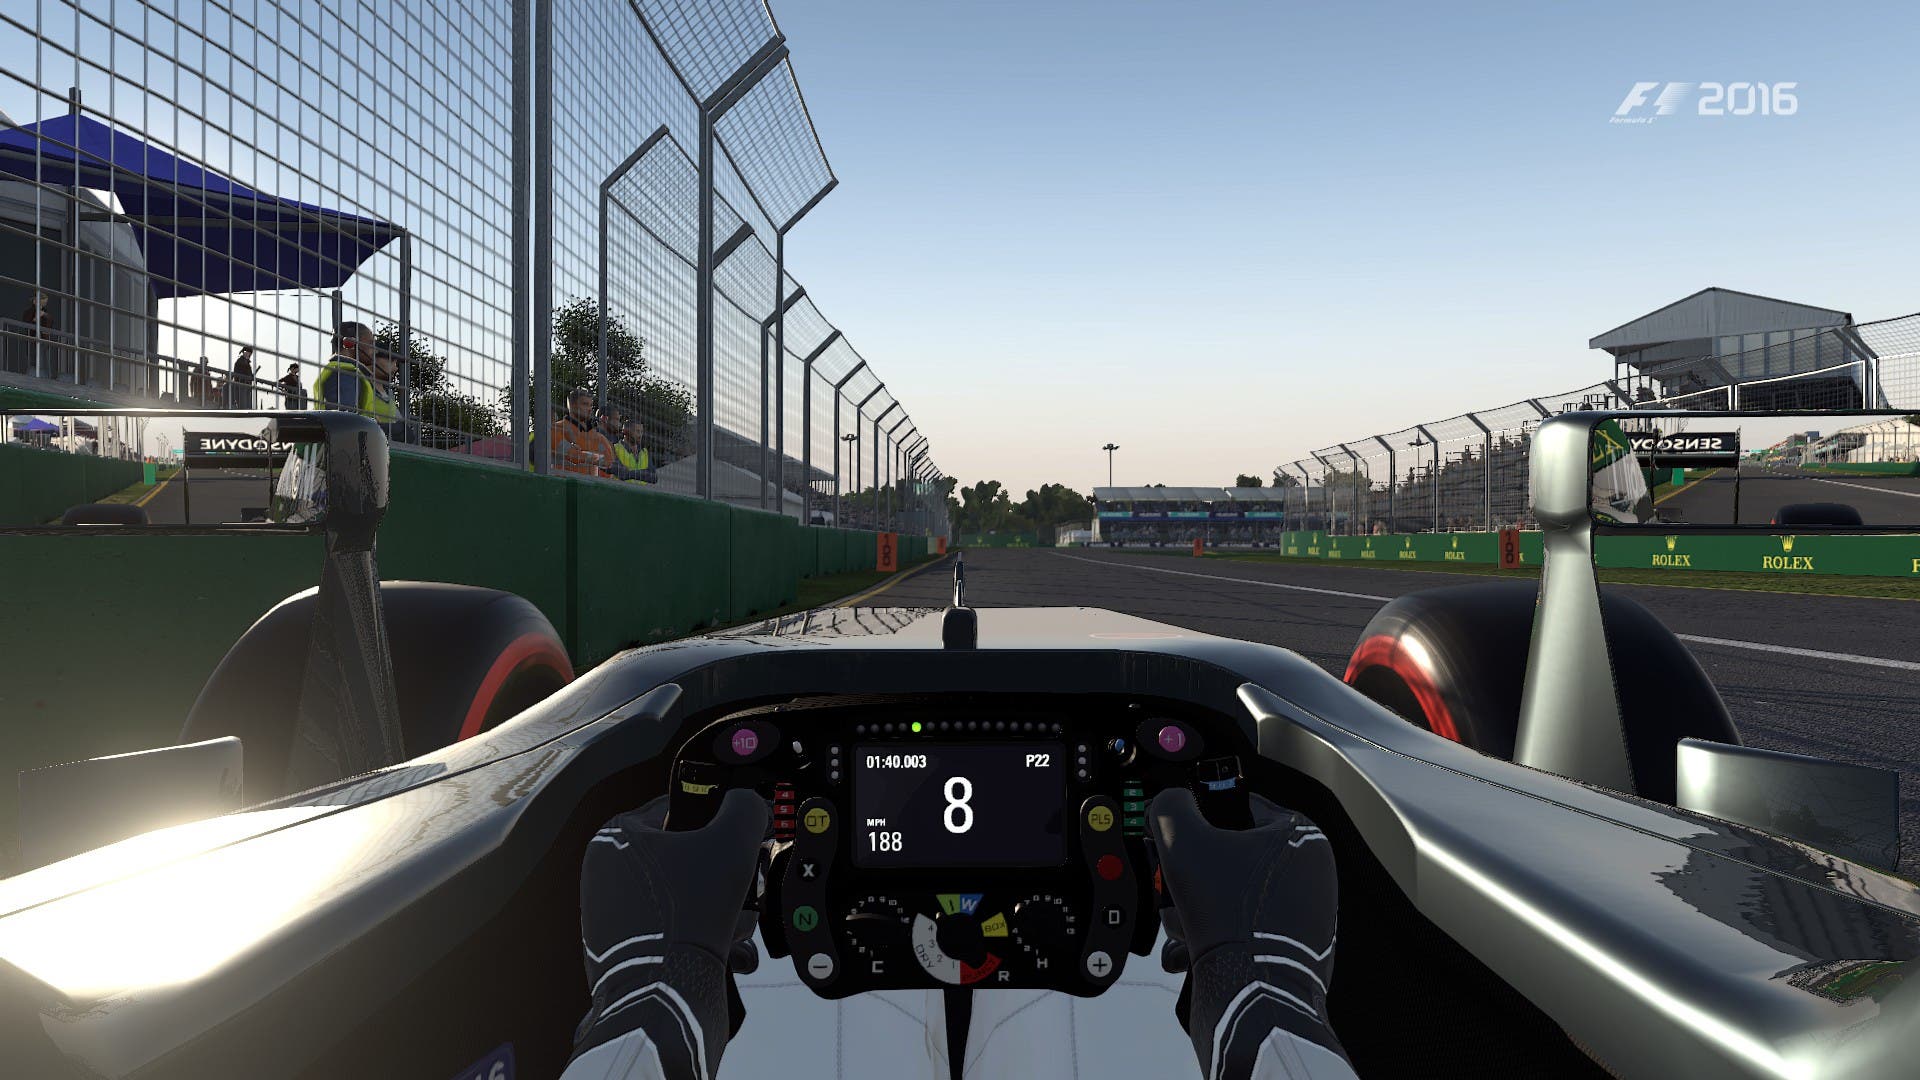 F12016-review3